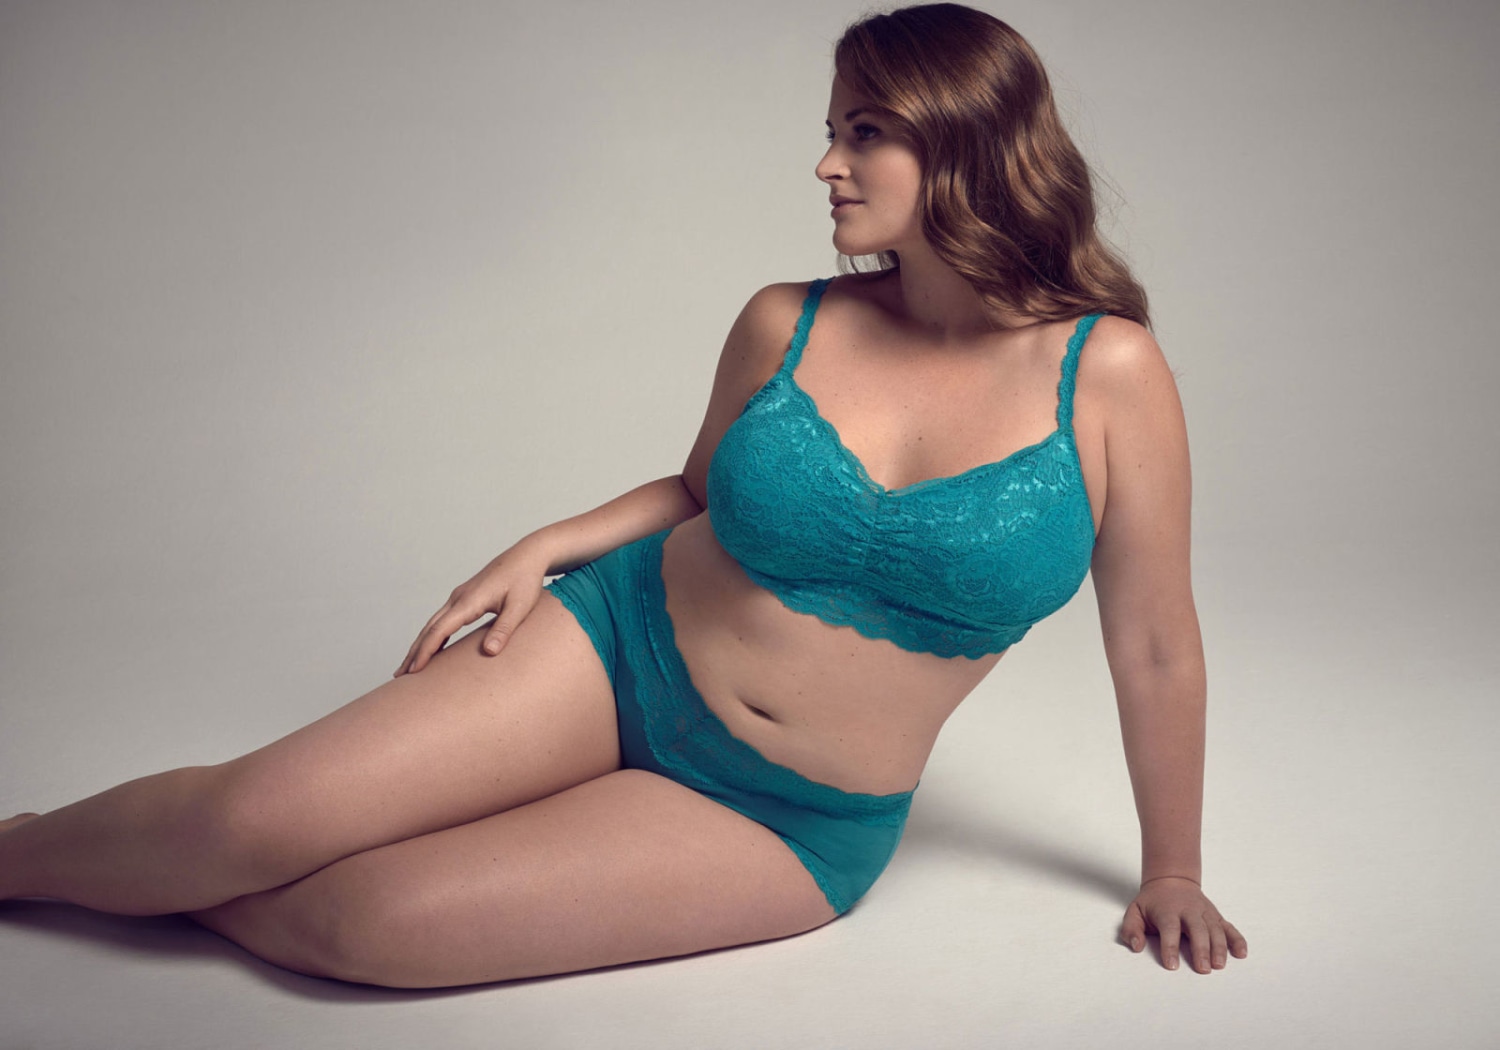 Cosabella 'extended' sizes looks to replace 'plus size